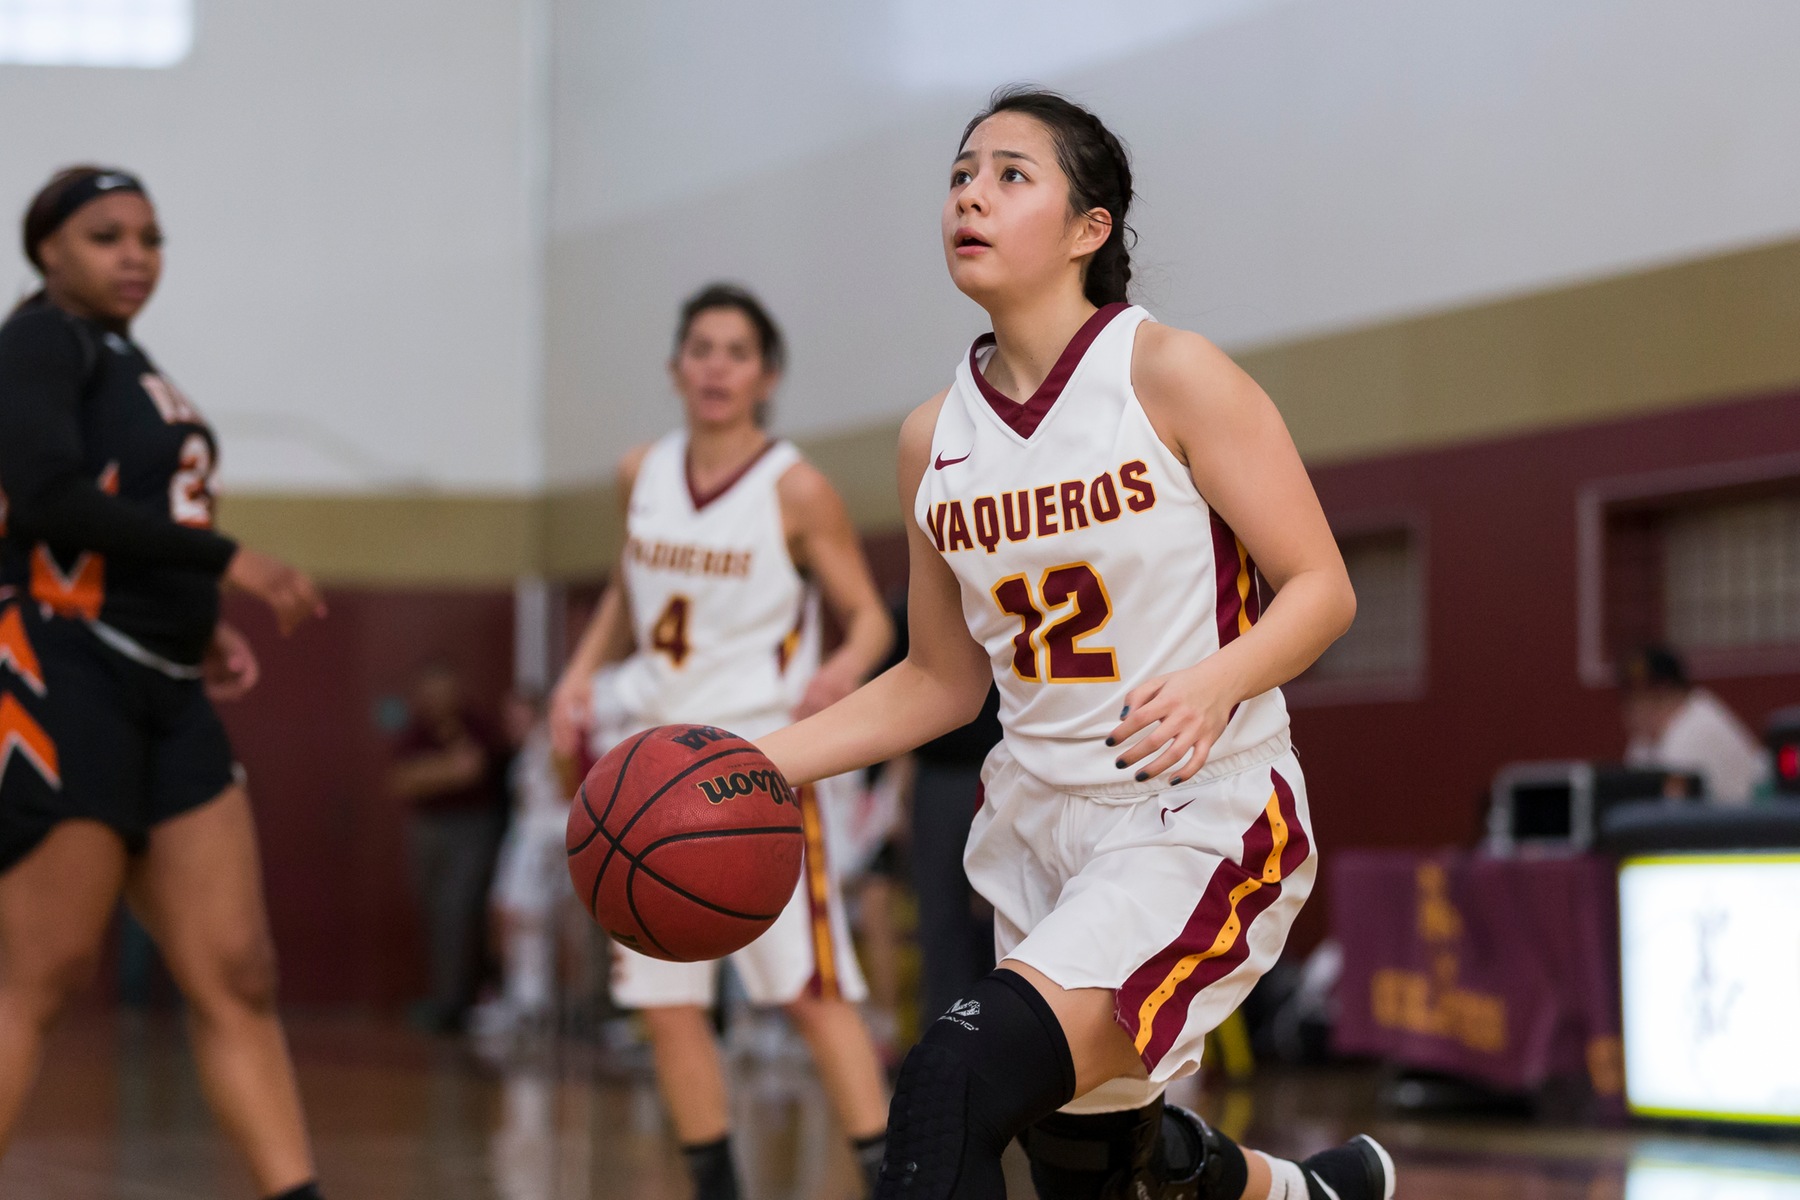 GCC improves to 22-2 with 65-45 win over Bakersfield